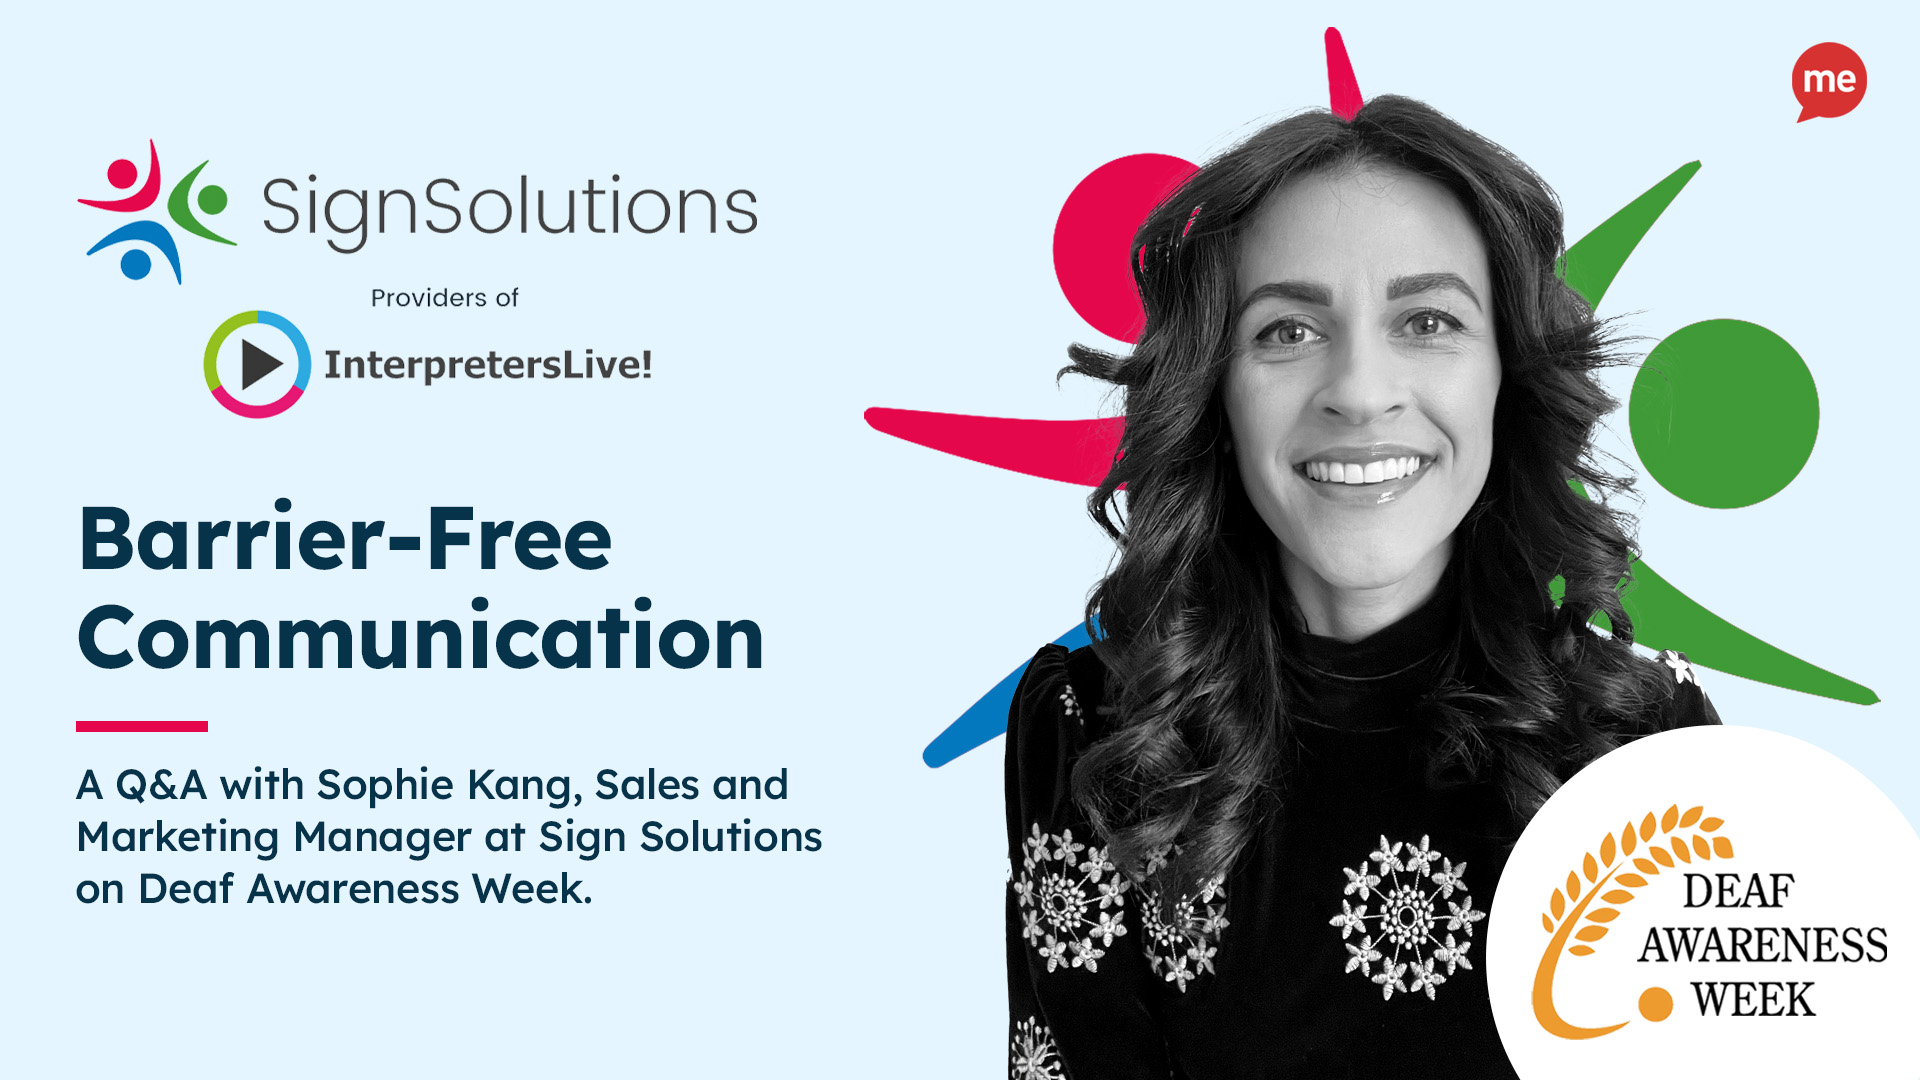 Barrier-Free Communications with Sign Solutions. A Q7A with Sophie Kang, Sales and Marketing Manager. Headshop of Sophie. Deaf Awareness Week logo